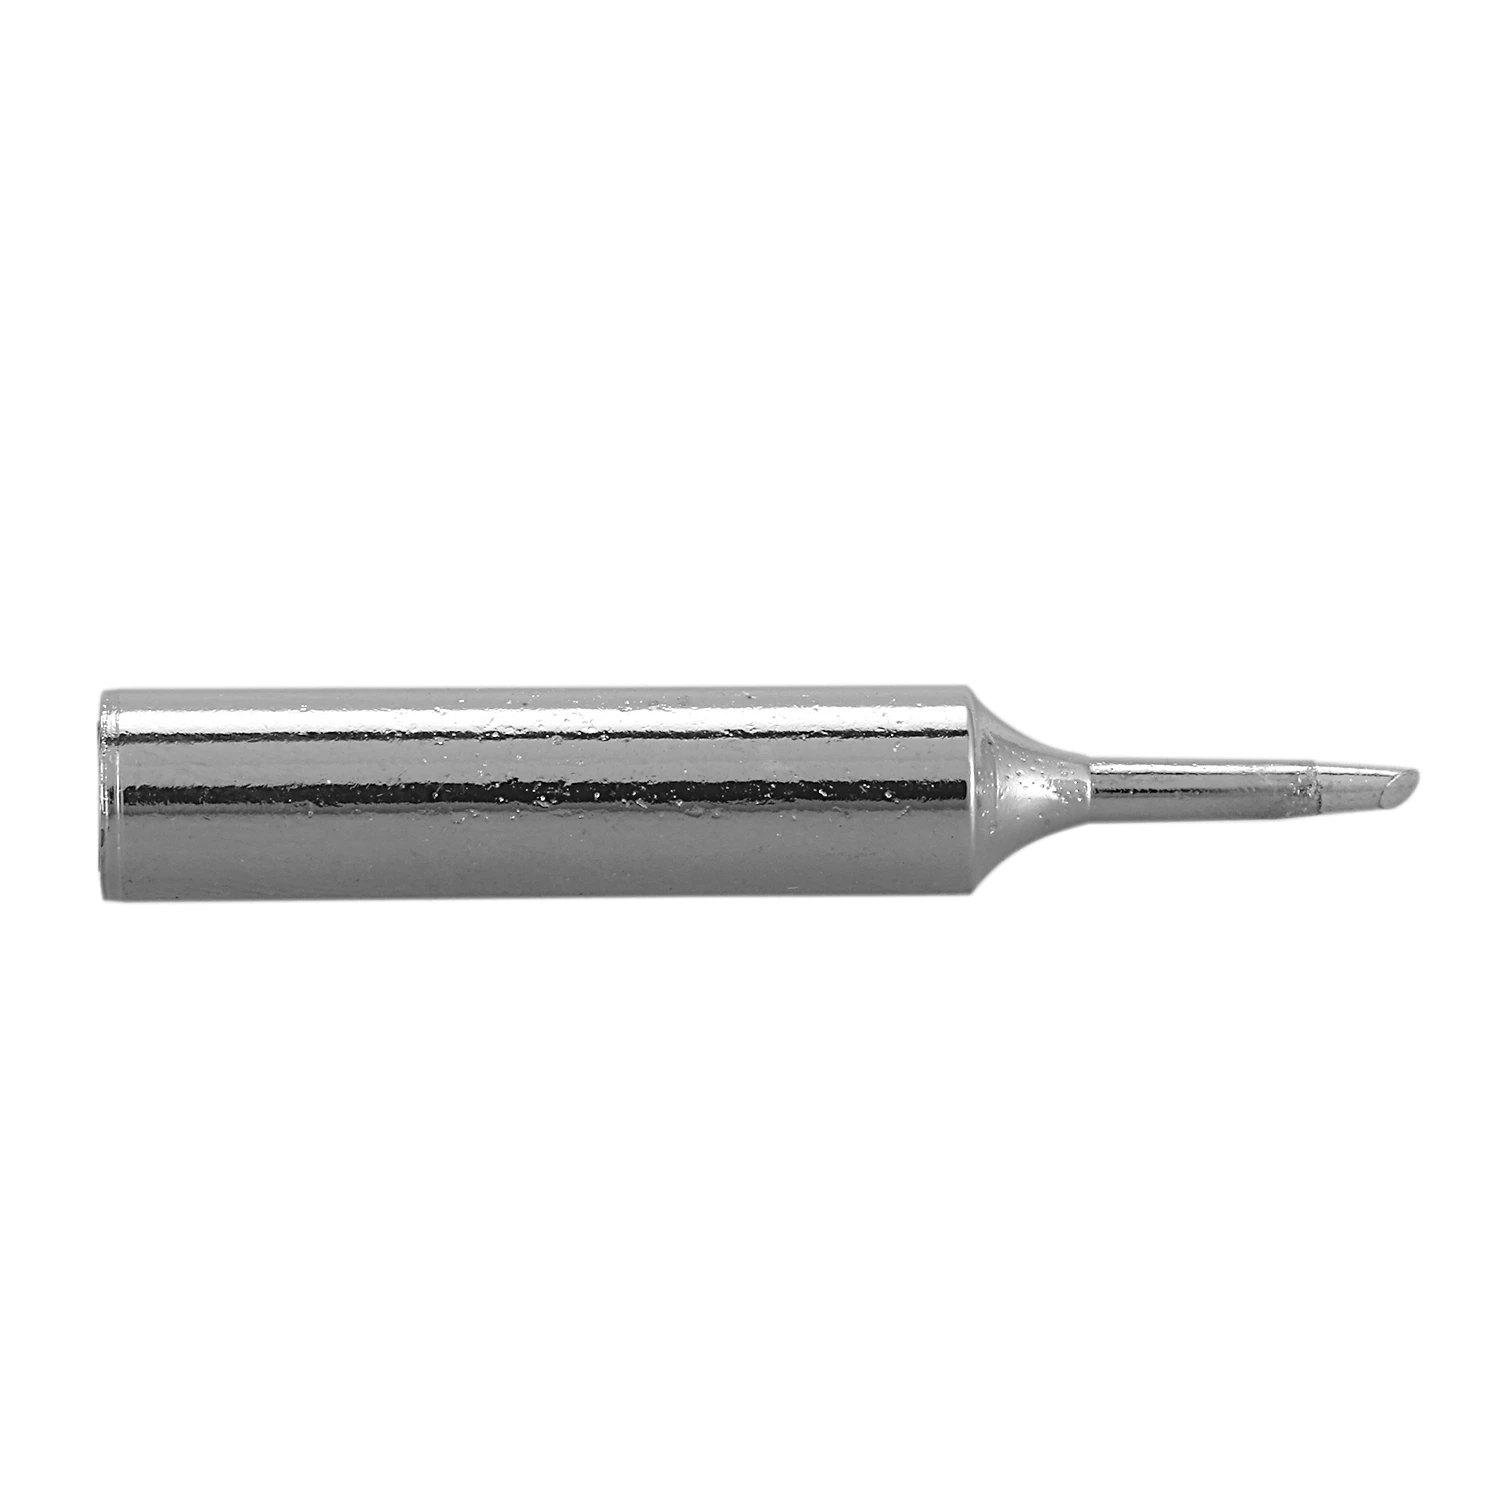 

900M-T-1C Replaceable Bevel Style Soldering Iron Solder Tip